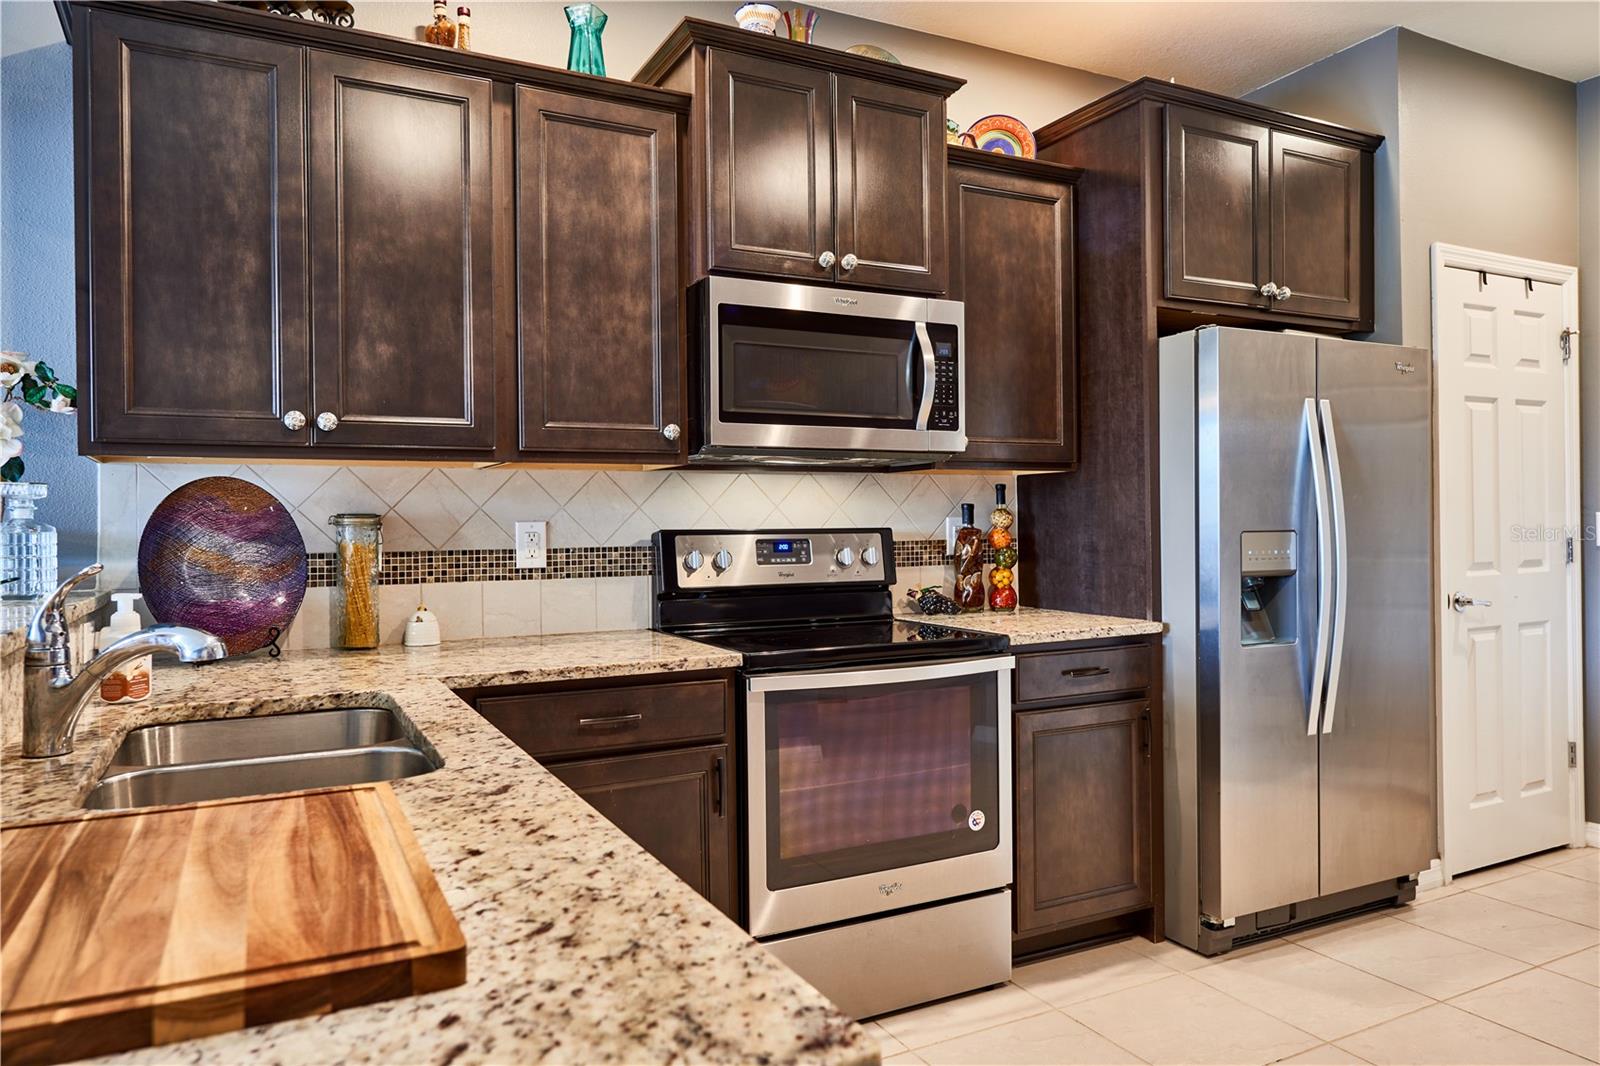 Glass and tile backsplash and stainless steel appliances